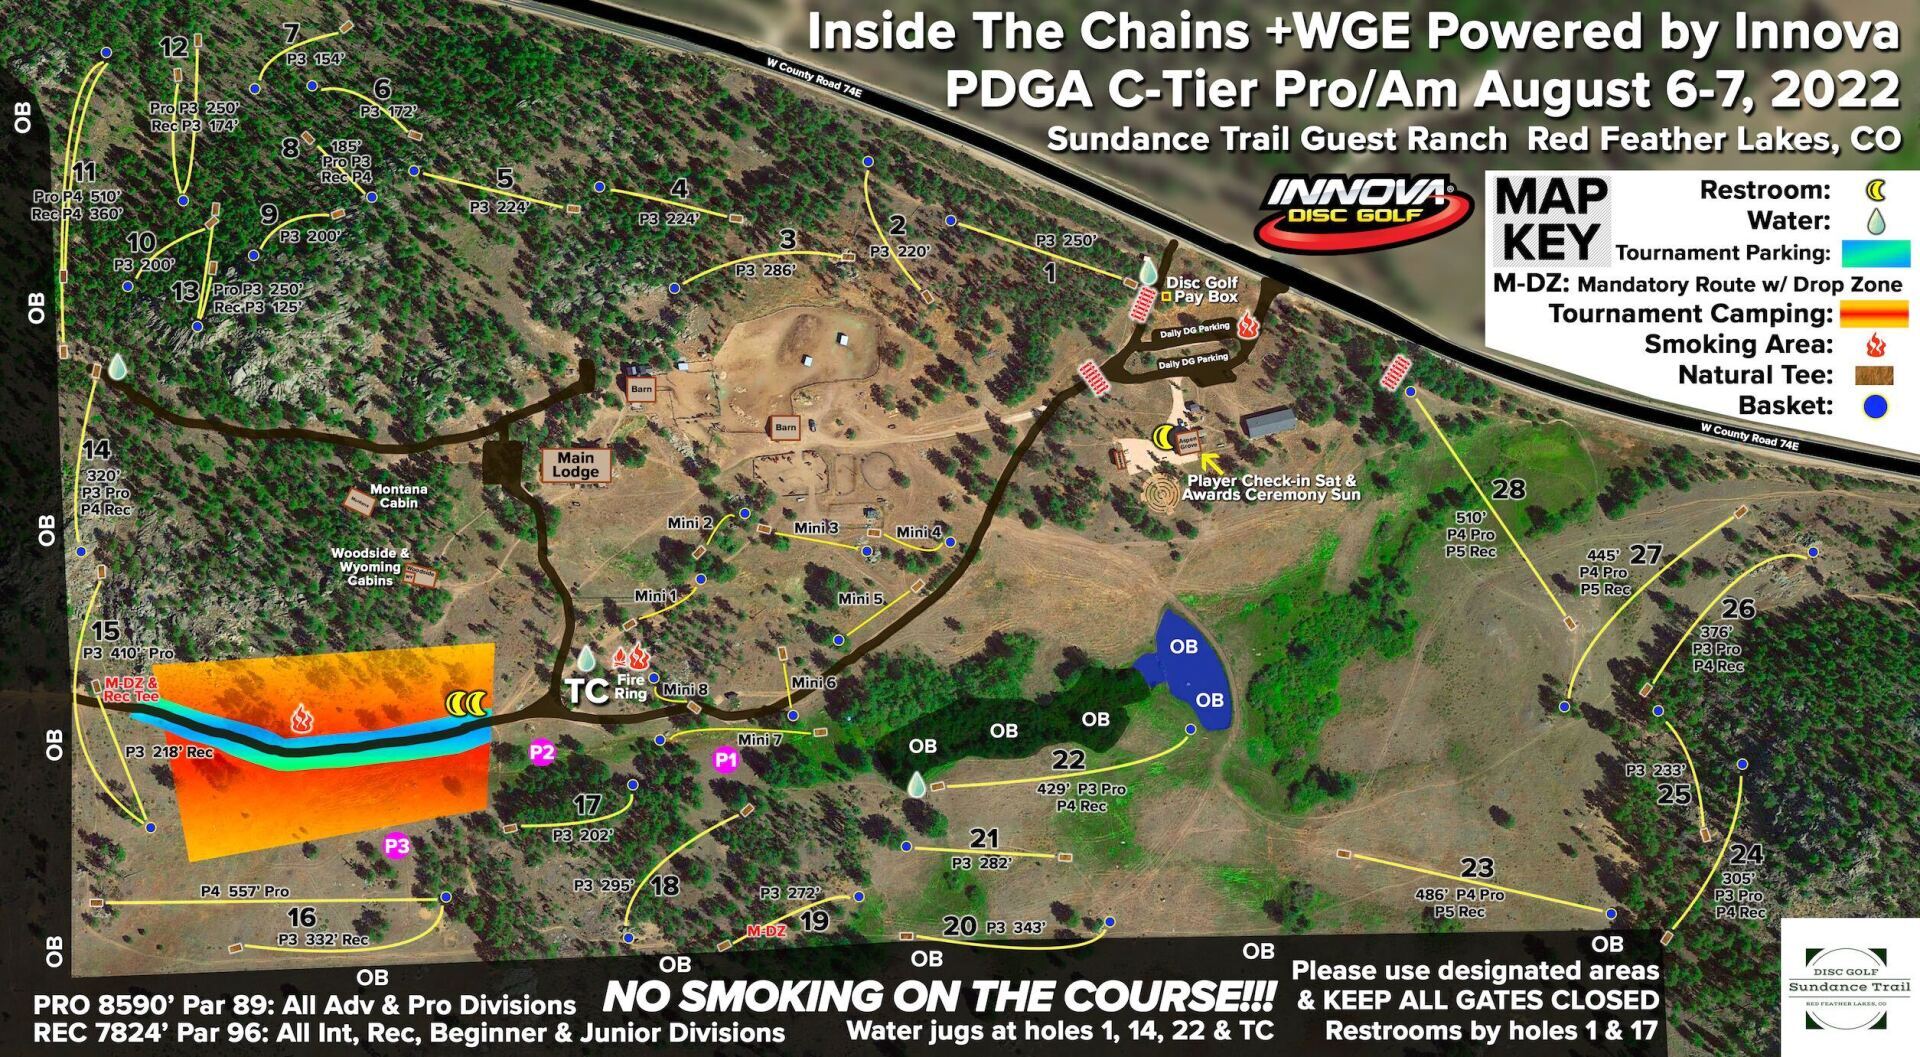 2022 Inside The Chains +WGE Powered by Innova Disc Golf Tournament